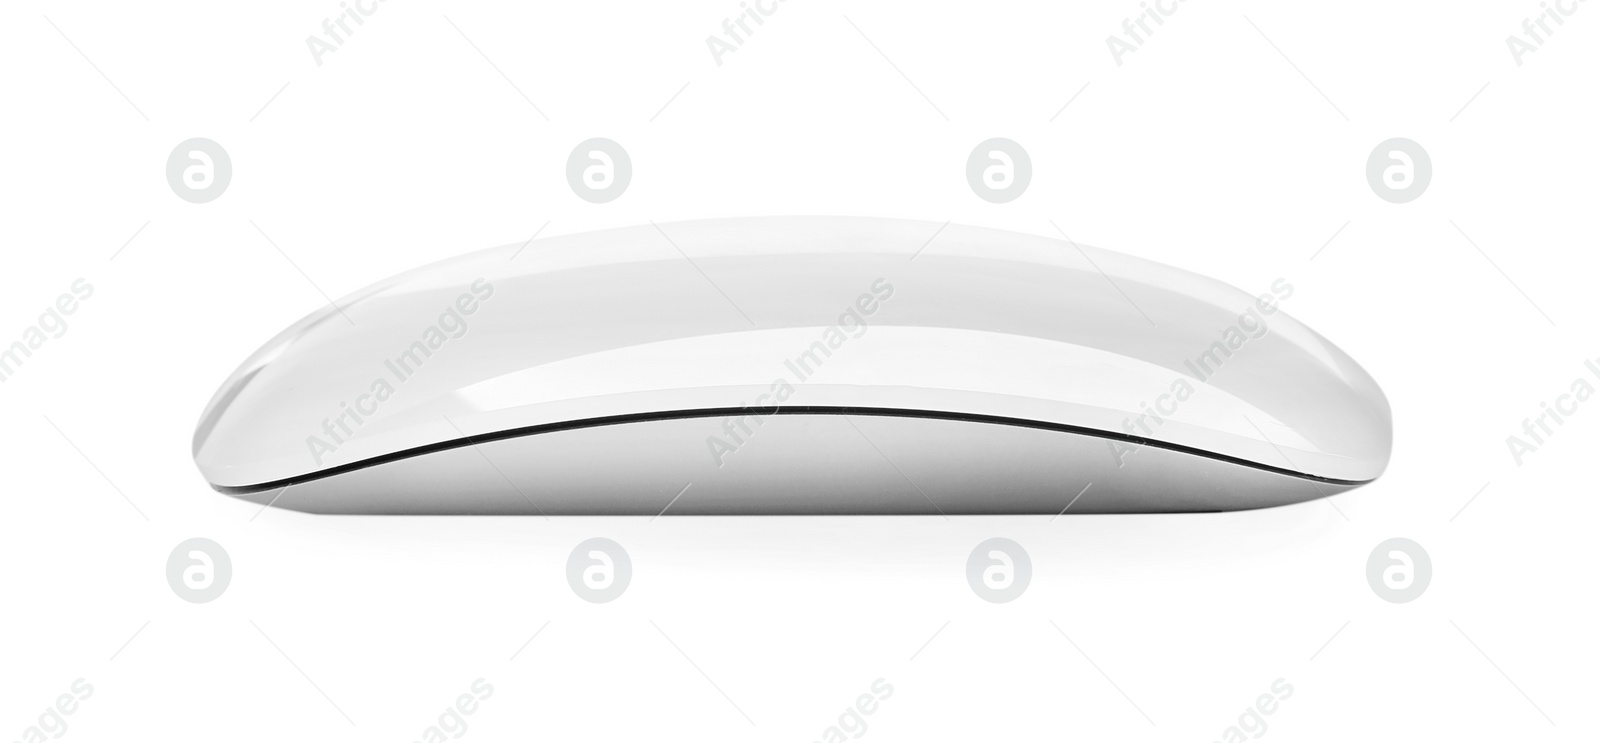 Photo of Modern wireless computer mouse isolated on white